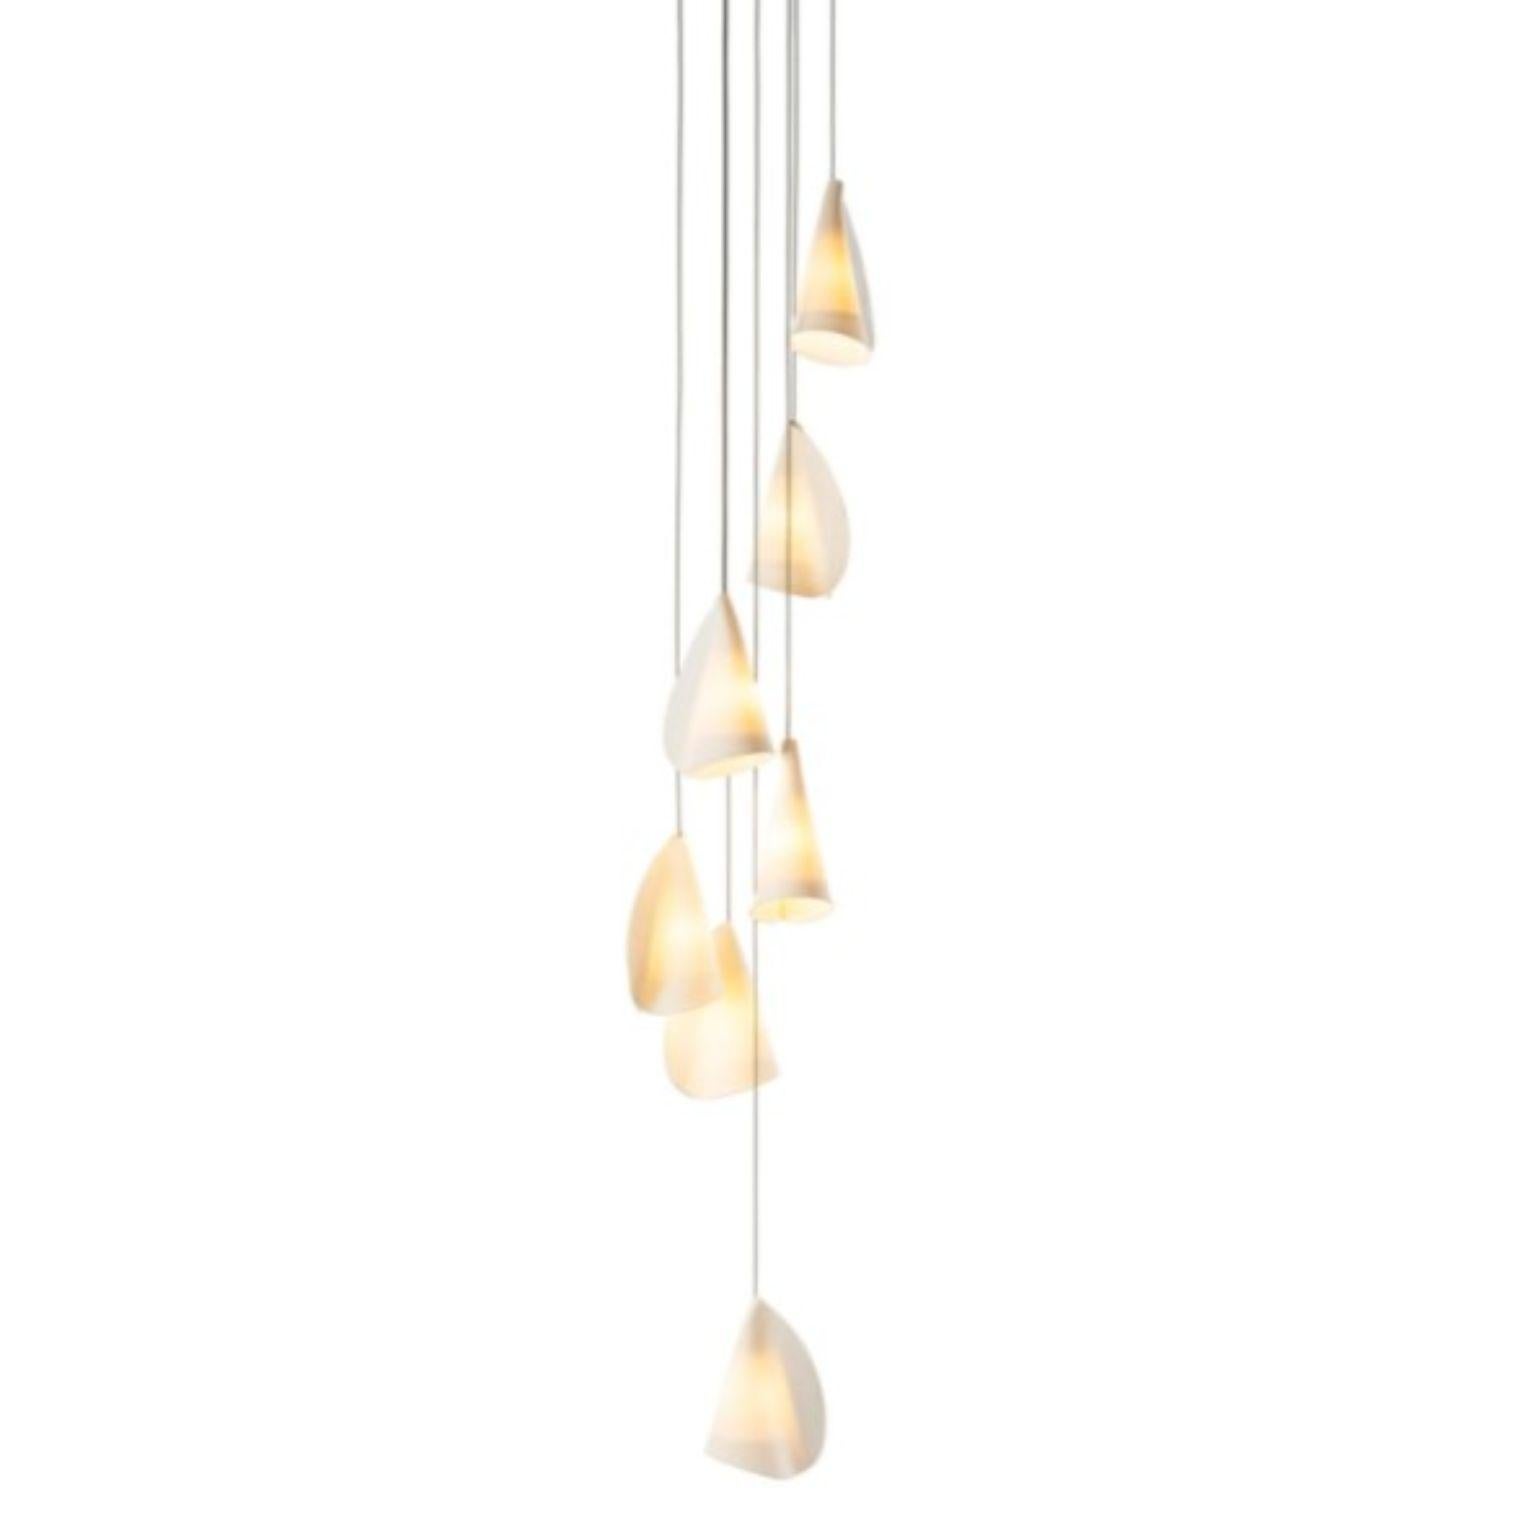 21.7 Pendant by Bocci
Dimensions: D20.3 x H300 cm
Materials: Brushed nickel, round canopy.
Weight:4.1 kg
Also available in different dimensions.

All our lamps can be wired according to each country. If sold to the USA it will be wired for the